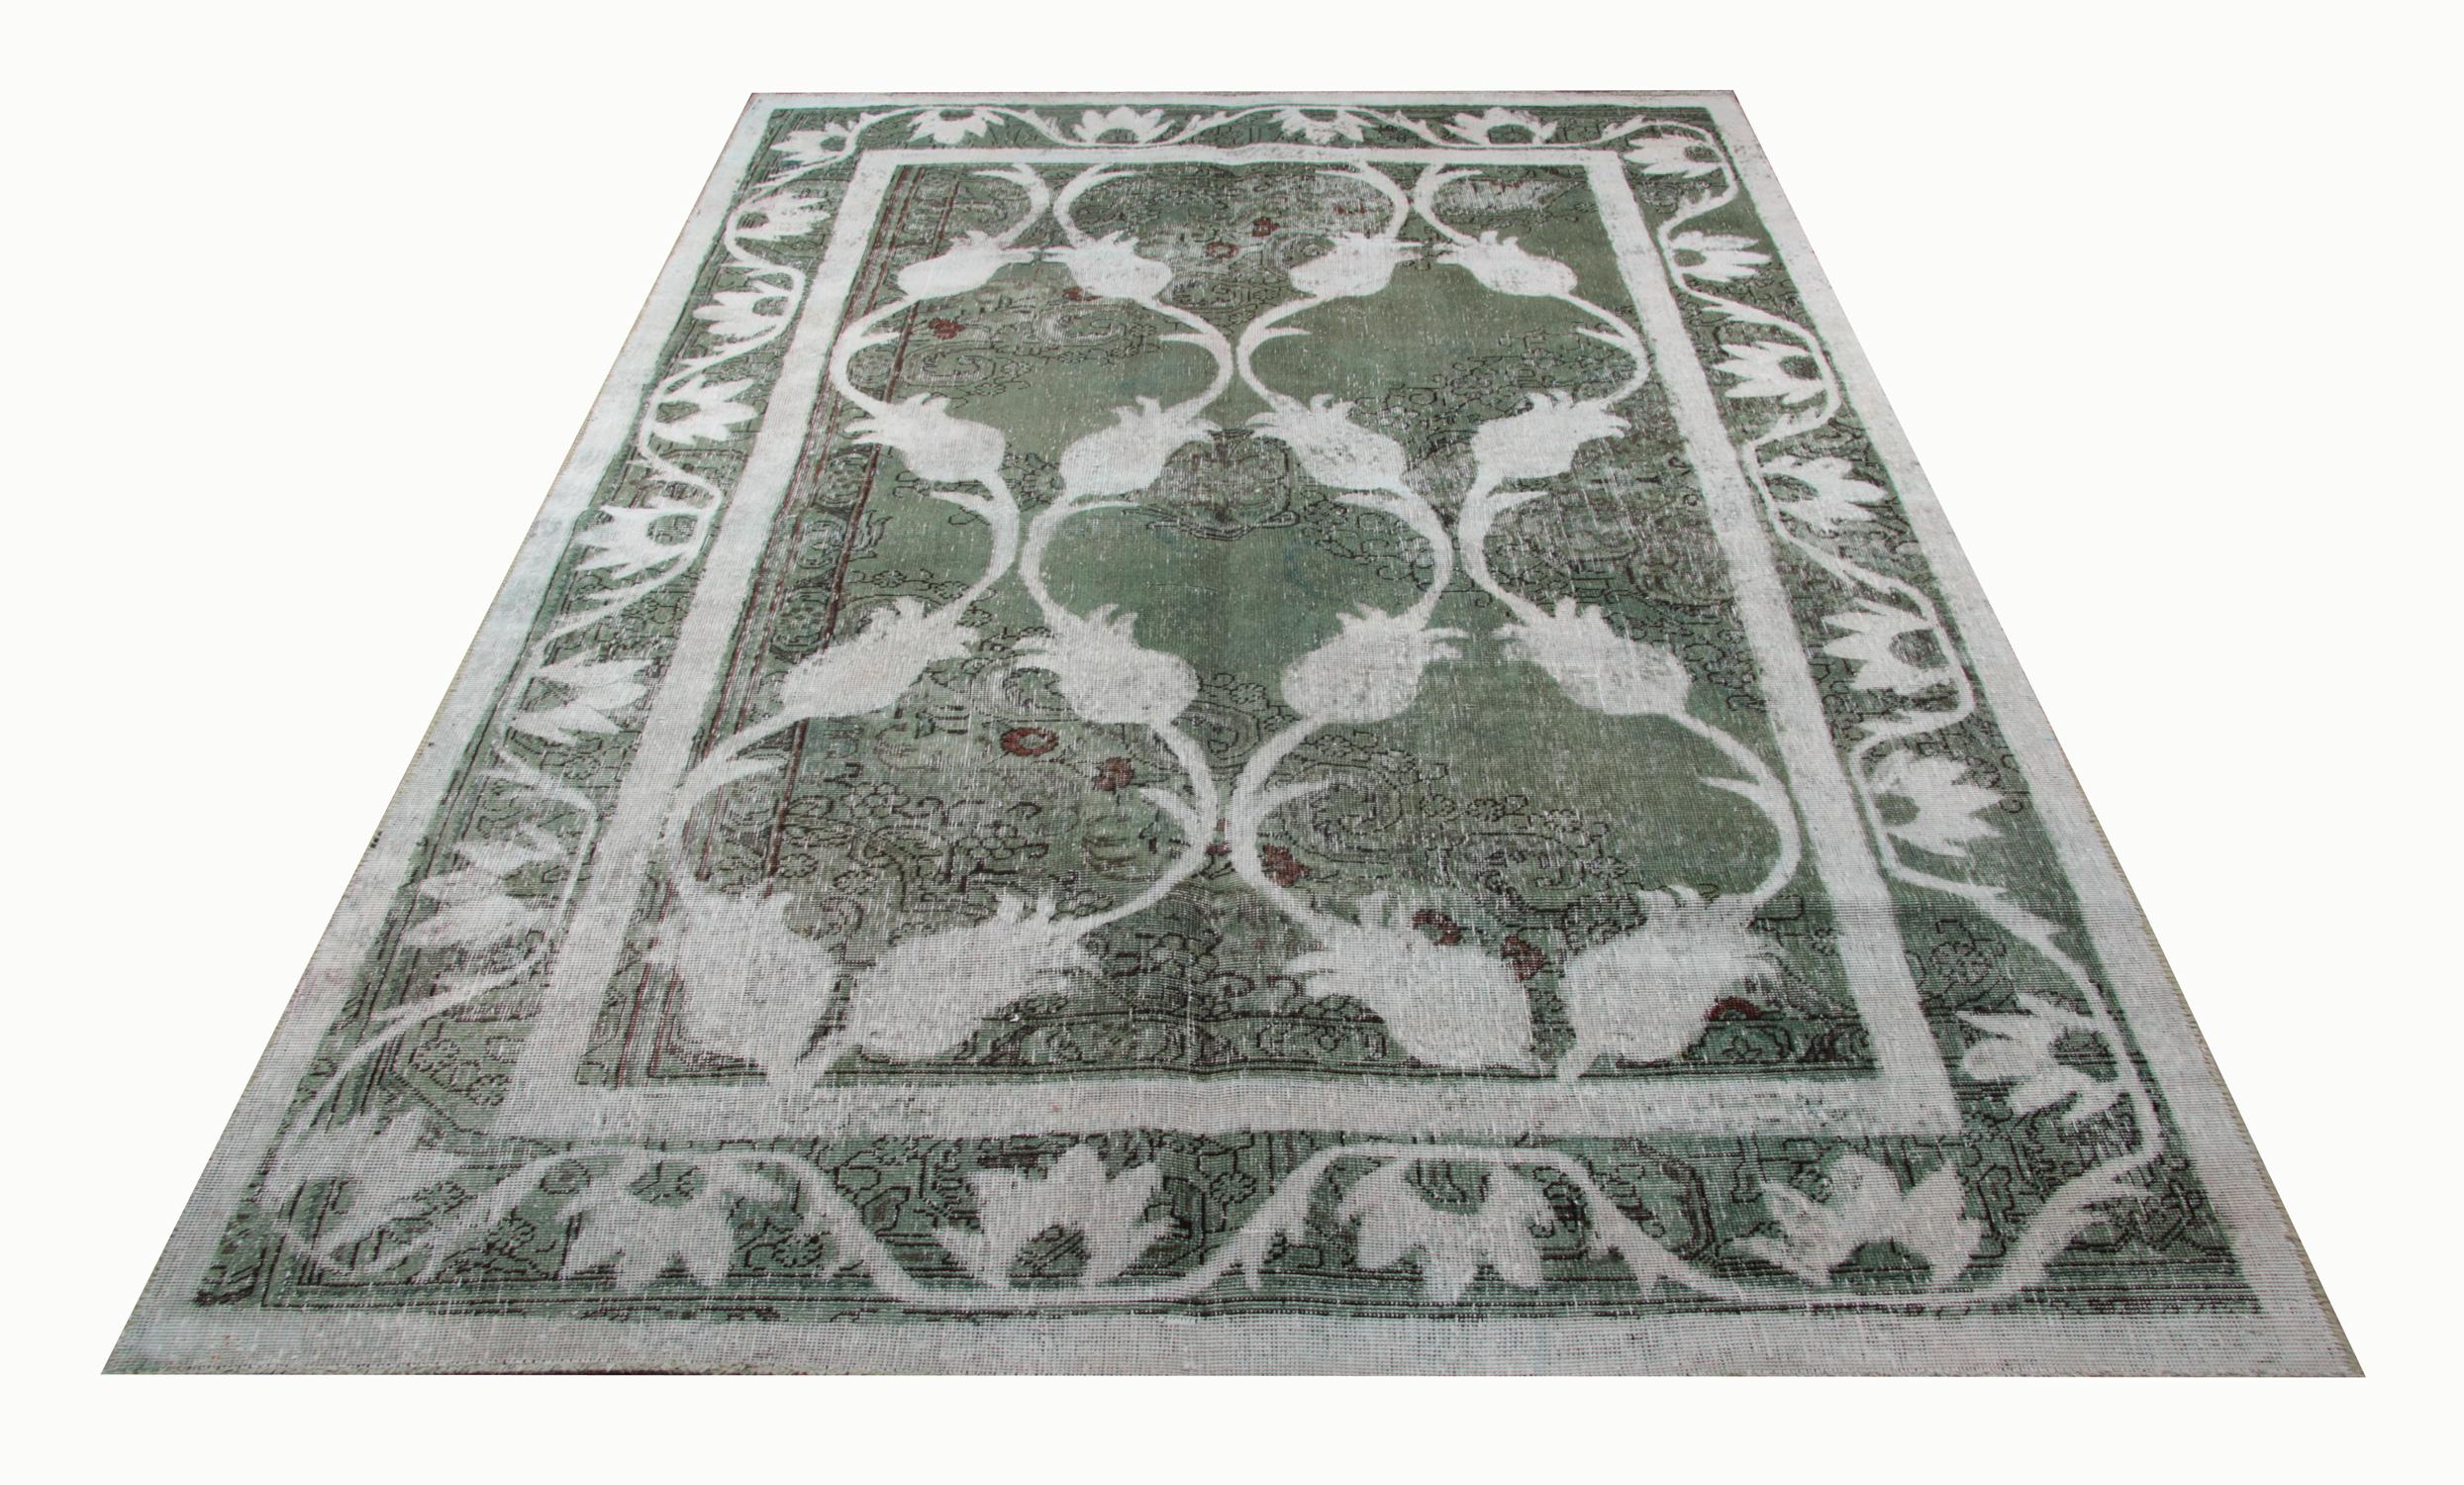 This handmade carpet oriental rug predominantly green handwoven vintage Turkish rug features a white floral pattern on a green background. This hand-painted oriental carpet is a stunning example of a handmade home decor rug. Because of its unique